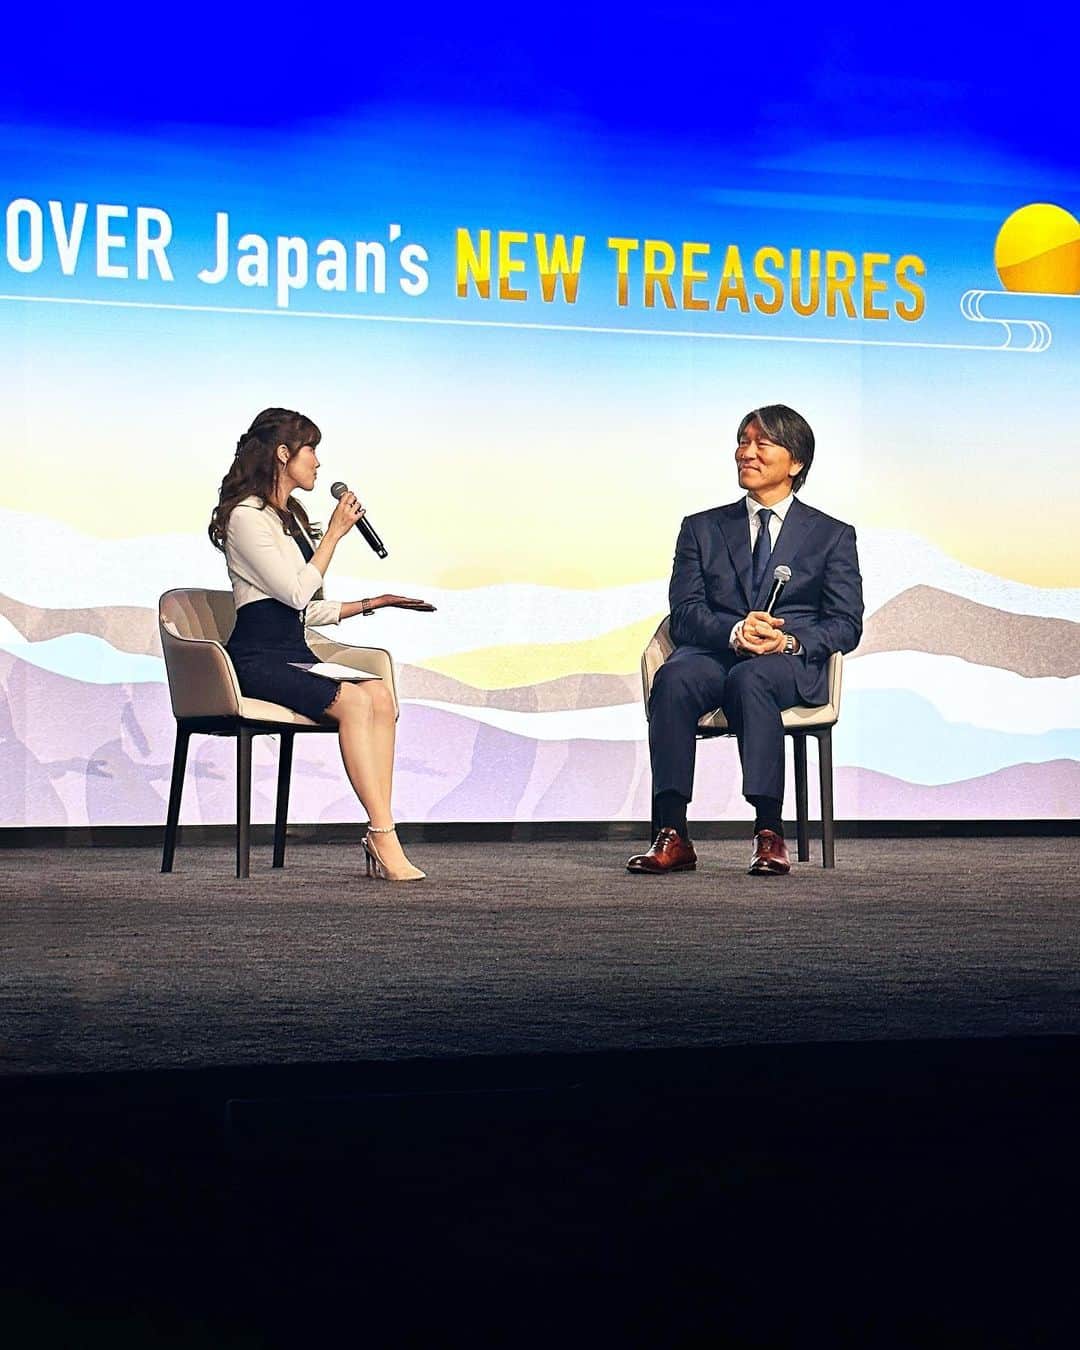 メロディー・モリタのインスタグラム：「バイリンガルMC + 松井秀喜さんにインタビュー @ 日本政府NYイベント🎤✨ JP government event MC + Yankees legend interview in New York City🗽🇺🇸🇯🇵  I had the honor of being the bilingual MC again this year for the global event organized by the Japanese government, welcoming 300 guests to discover “new treasures” of tourism in Japan.  We had special appearances and words from Prime Minister Fumio Kishida, Mr. Saito (Minister of Land, Infrastructure, Transport, and Tourism), Mr. Takahashi (Commissioner of the Japan Tourism Agency), and Mr. Norikazu Suzuki (Japan State-Minister of Agriculture, Forestry and Fisheries), members of the House of Representatives, specialists from the travel industry, and US-Japan relations.  Mr. Hideki Matsui, a former professional baseball player at New York Yankees, was also in attendance! I spoke with the star on stage as he shared his memories of NY and Japan as well as his personal travel recommendations centered around his home prefecture, Ishikawa.  I’m very grateful to be a part of another successful event, coming together to celebrate Japanese culture right in the heart of New York City.😊  去年に引き続き、日本政府主催のグローバルイベントで司会を務めさせて頂きました✨  ニューヨークで、日本の観光や和食の魅力をアメリカに紹介するイベントに約300人が招待されました。日本からは、高橋観光庁長官、斎藤国土交通大臣などがご挨拶をされ、岸田総理からもメッセージを頂きました。  スペシャルゲストとしてニューヨーク・ヤンキースのレジェンドである松井秀喜さんをお迎えし、ステージトークで松井さんのご出身である石川県の魅力や、お気に入りスポットなどを伺いました🇯🇵 松井さんが外国人に是非行ってほしい場所は、石川、福井、富山、新潟、長野の軽井沢だそうです💡 今年の5月に日本へご帰国された際はご家族でゆっくり過ごされたというお話、本番前の打ち合わせでの穏やかなお人柄にも感動しました☺️  イベント会場のブースでは、日本政府観光局、日本食品海外プロモーション、農水省、国税庁、推進業議会など、体験型ブースも盛りだくさんでした。日本ならではの食や文化を実感できる素晴らしい機会にニューヨーカー達にも笑顔が溢れ、最高のイベントとなりました😊  Sponsors/Booths: Japan National Tourism Organization, JETRO, JFOODO, National Tax Agency Japan, Japan Farmed Fish Export Association, Gotouchi Touring of Premium Cultural Experiences, Japan Airlines, All Nippon Airways, Hotel New Otani, Keio Plaza Hotel, Tokyu Hotels & Resorts, Prince Hotel & Resorts, Imperial Hotel & more  #日本政府観光局 #農水省 #松井秀喜 #ニューヨーク #バイリンガルMC #バイリンガル司会 #インタビュアー #MelodeeMoritaInterviews」